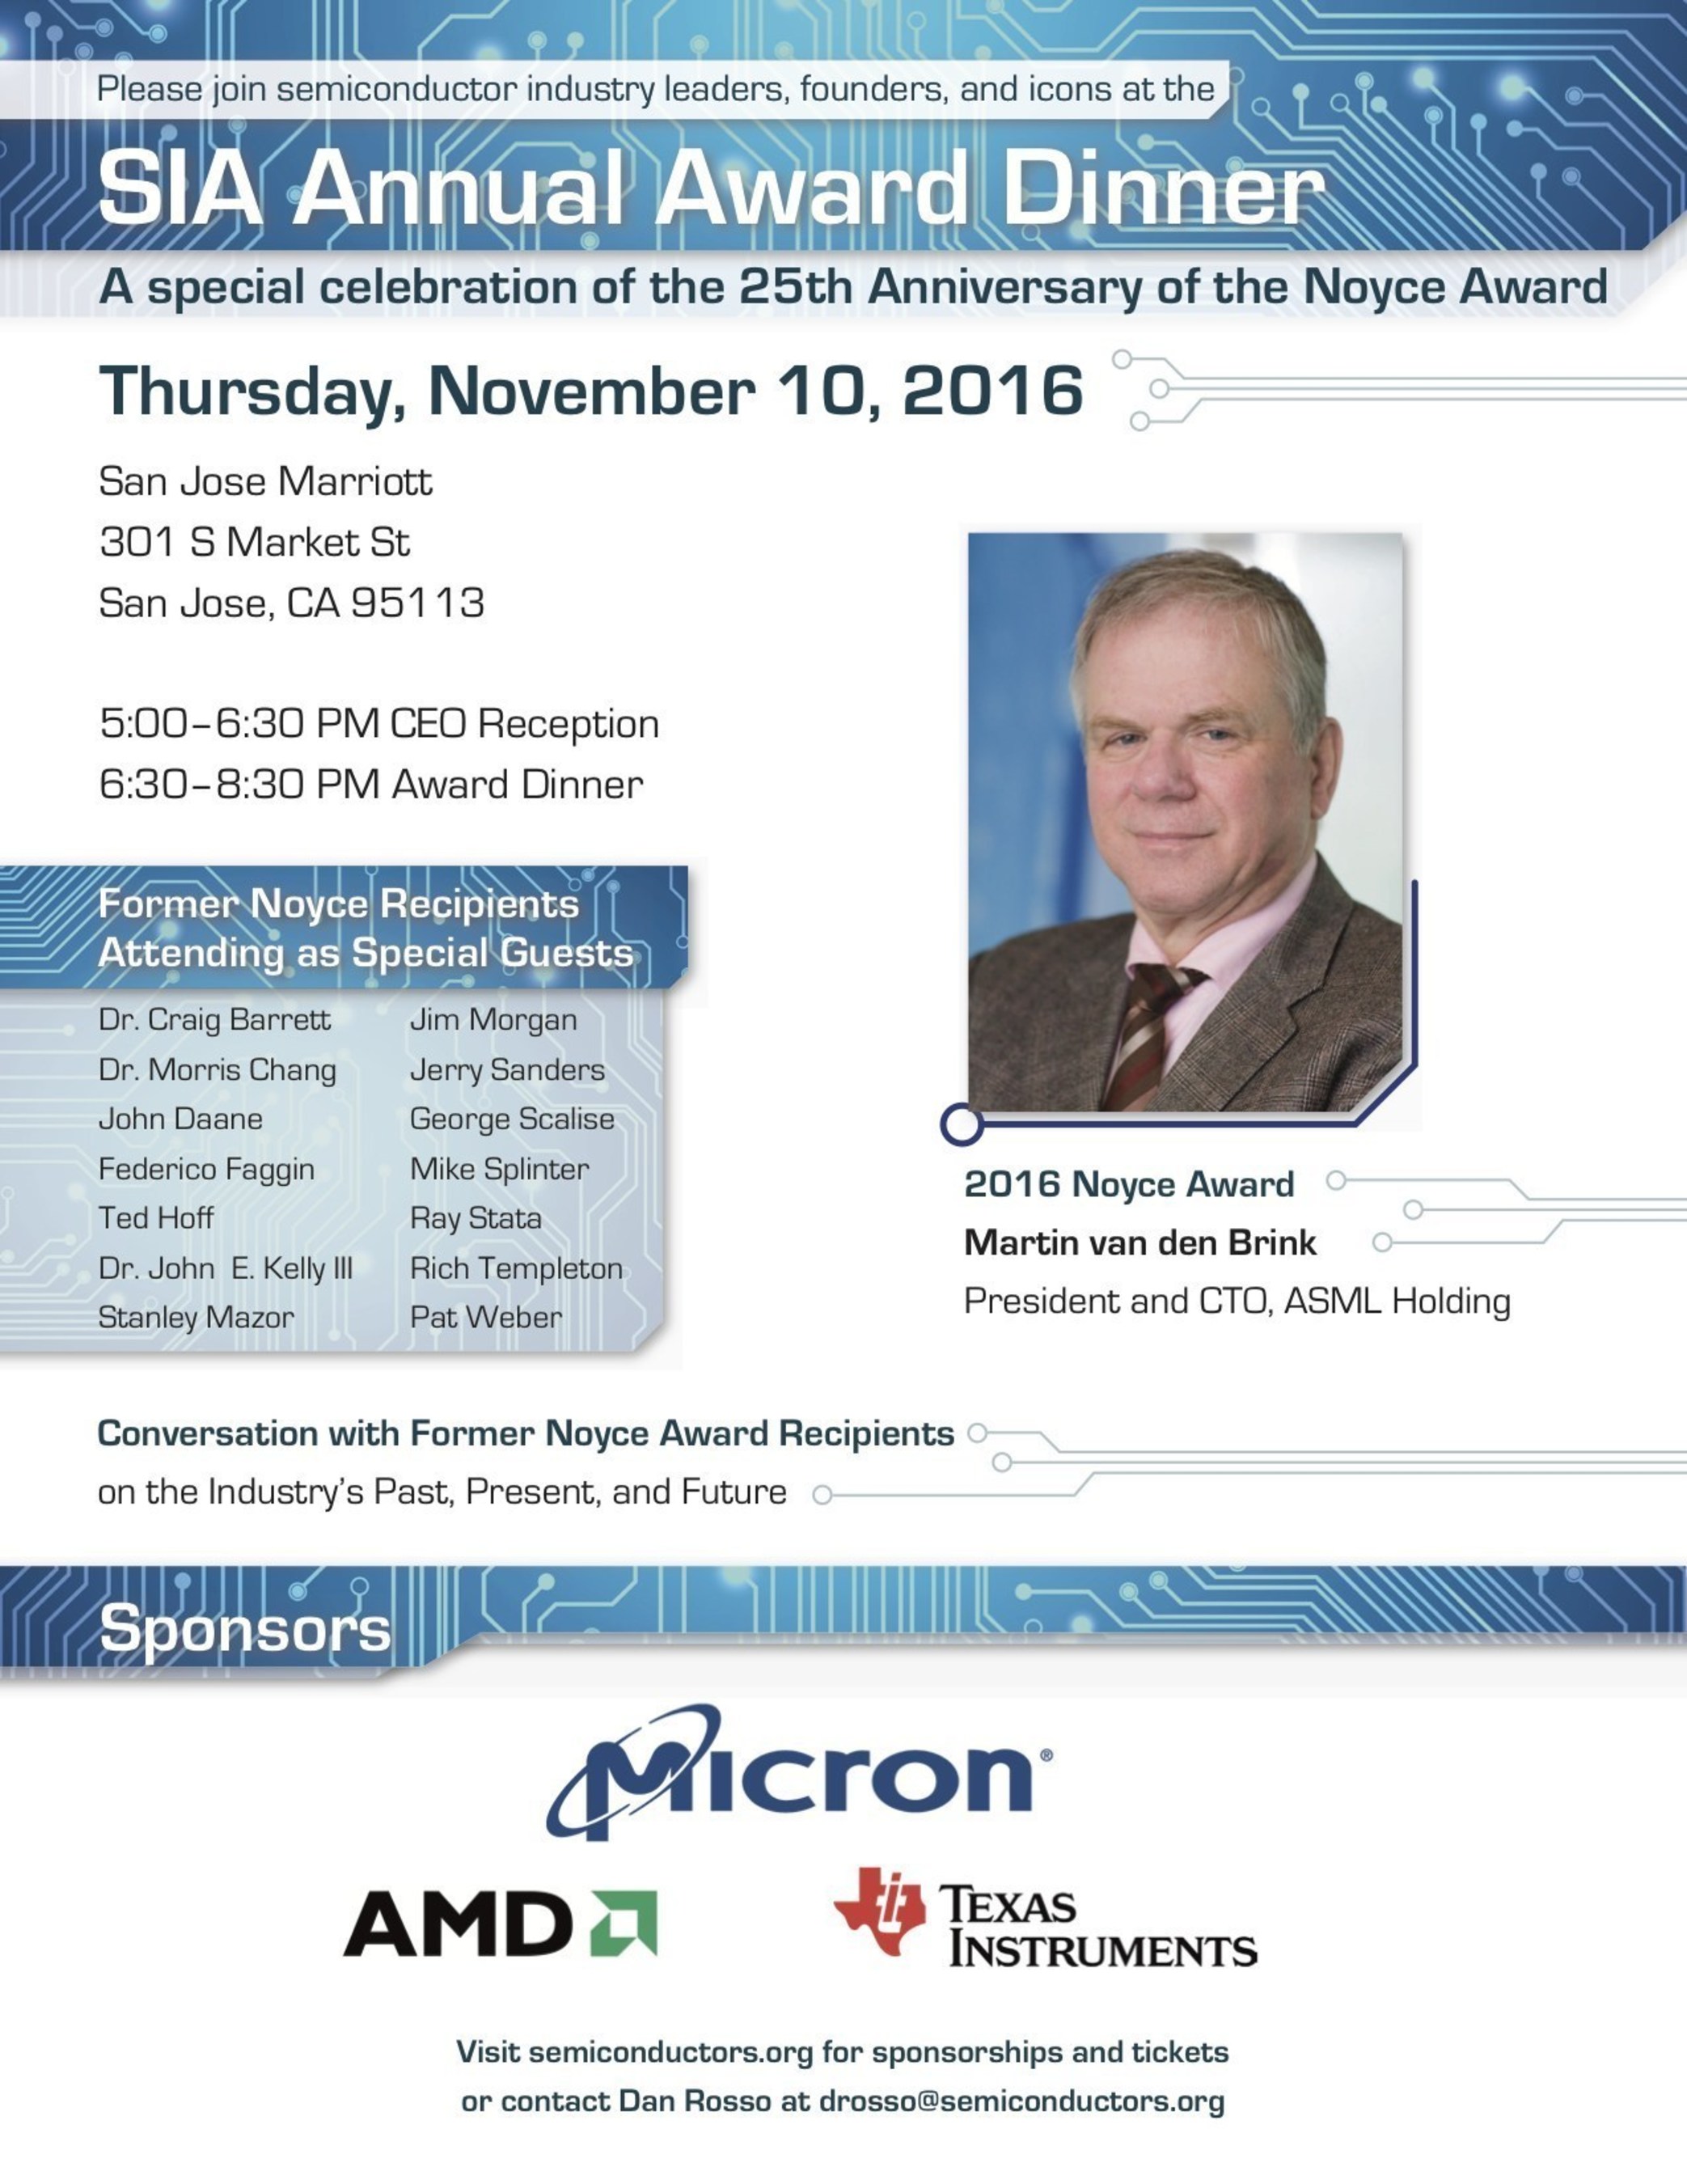 The SIA Annual Award Dinner will take place on Nov. 10, 2016 at the San Jose Marriott.